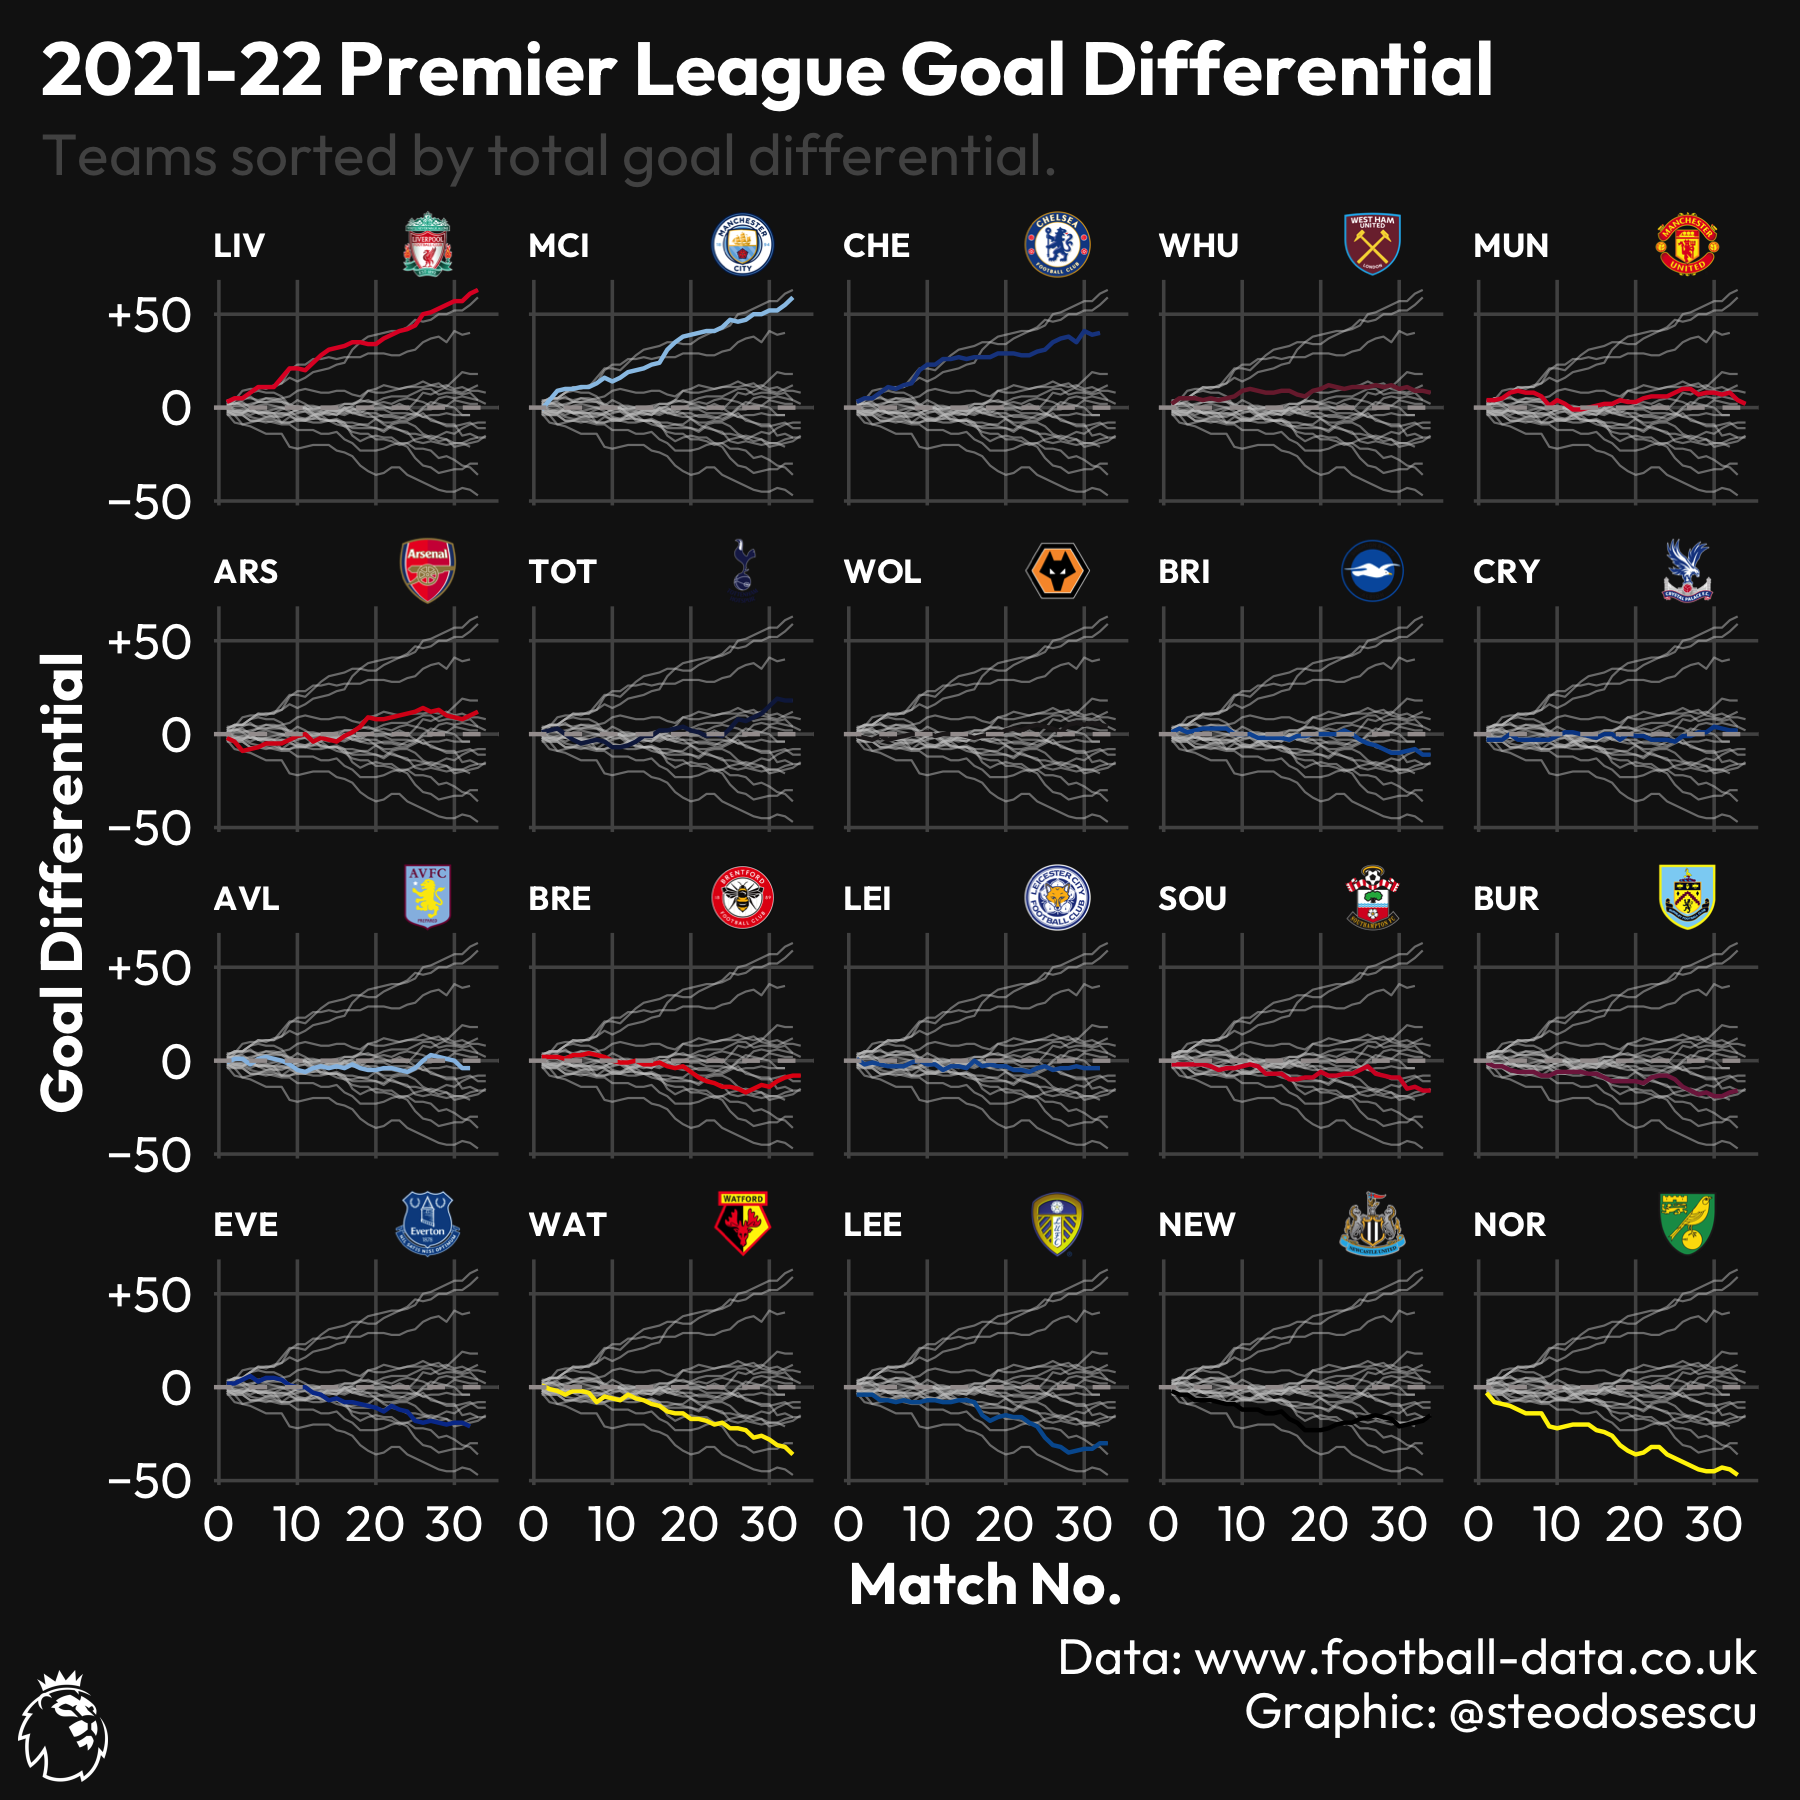 EPL Goal Differential